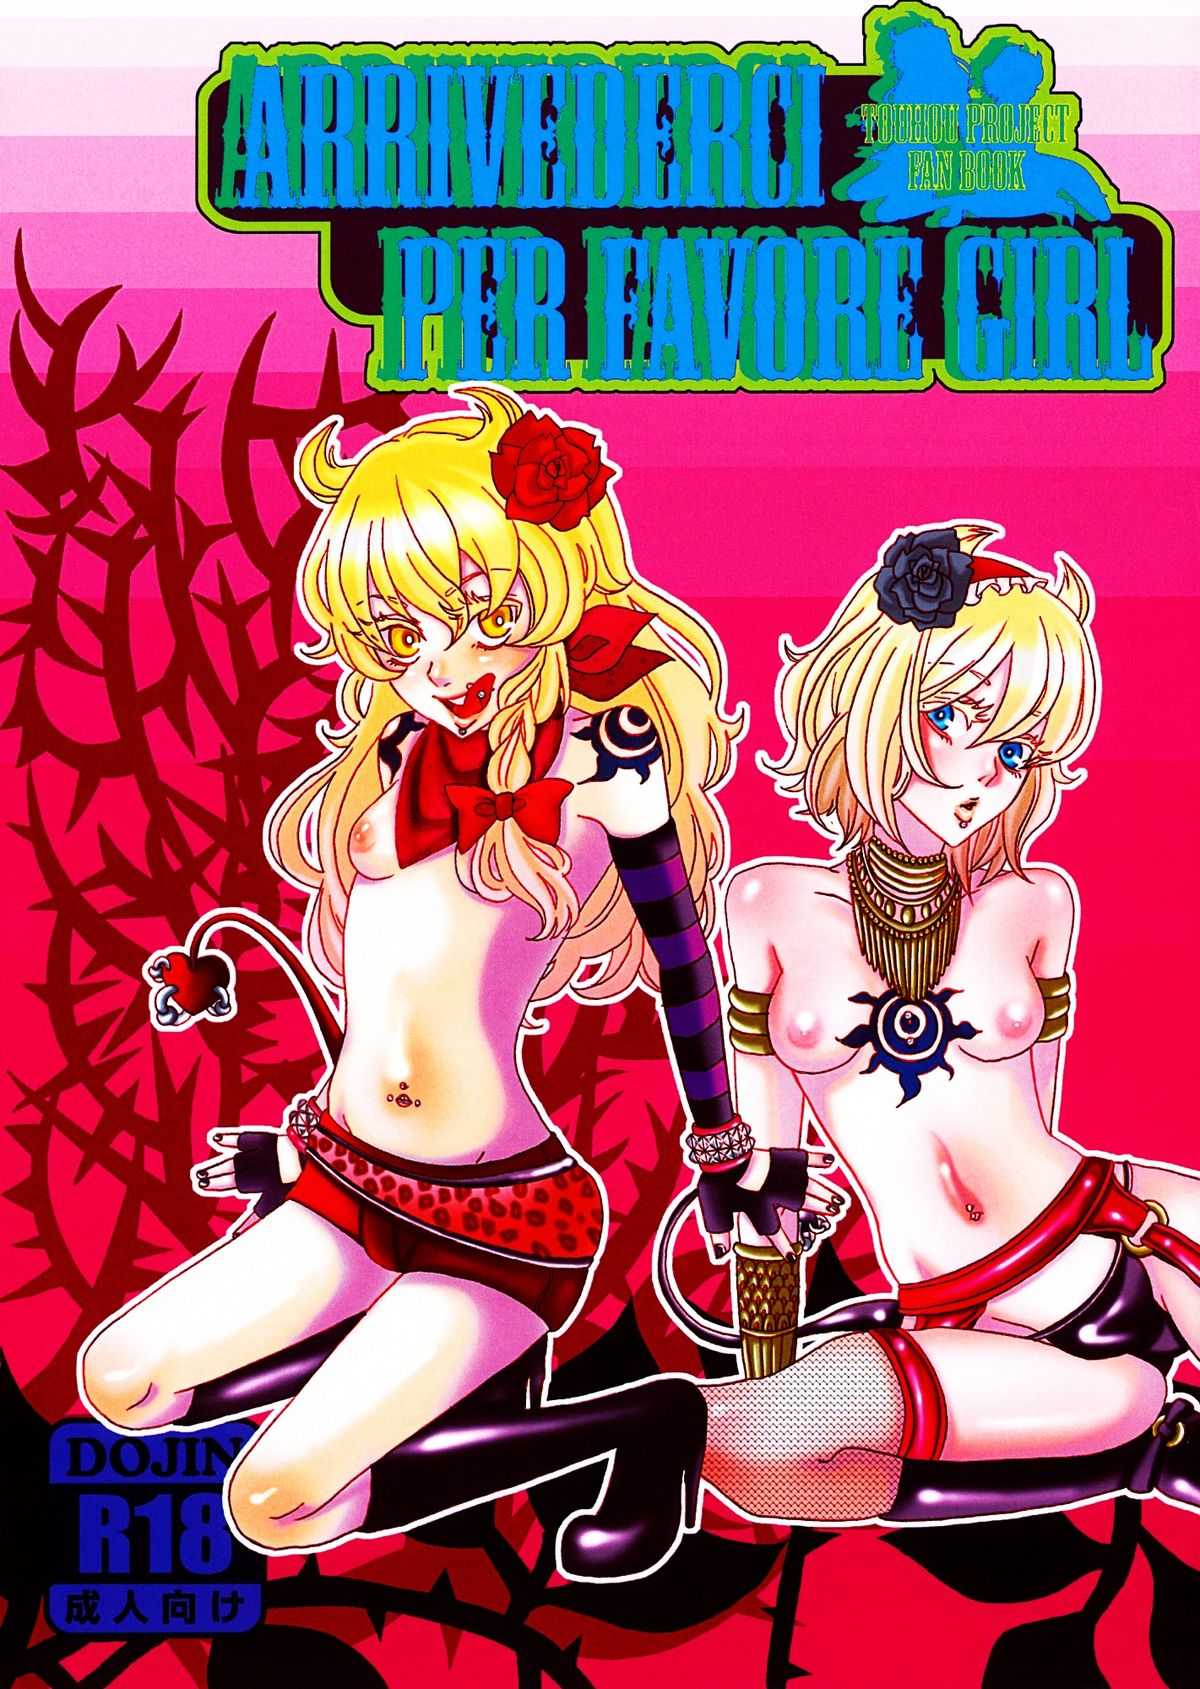 Arrivederci Perfavore Girl (Touhou project fanbook) 